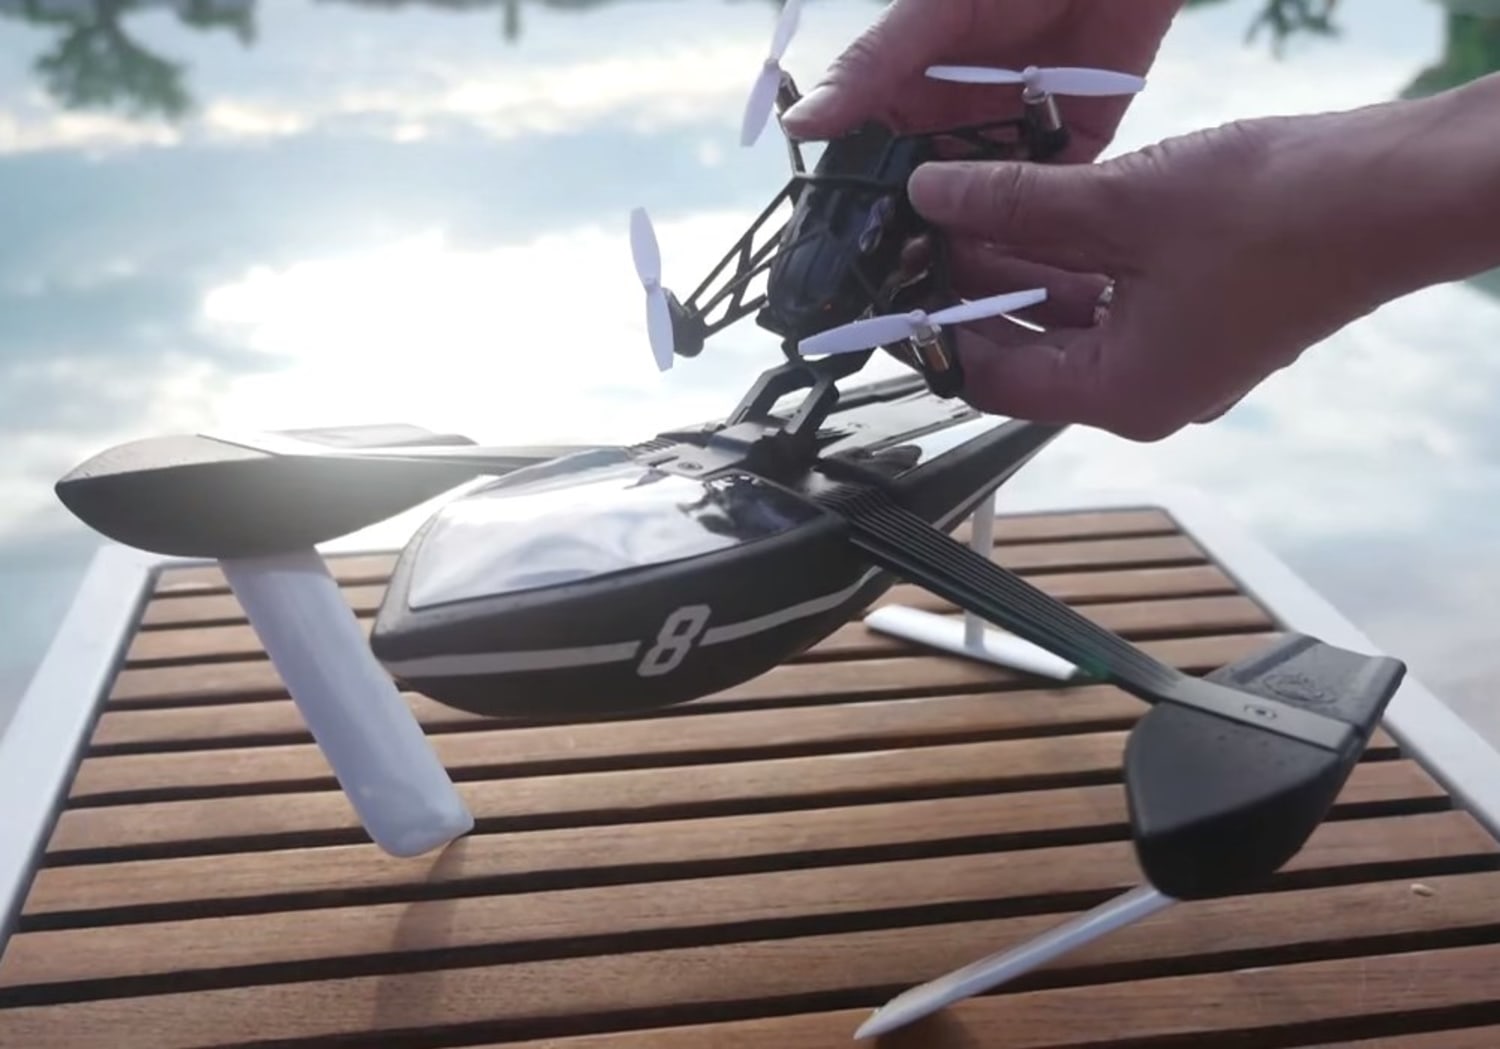 Parrot's Hydrofoil Drone Conquers Air and Sea Alike